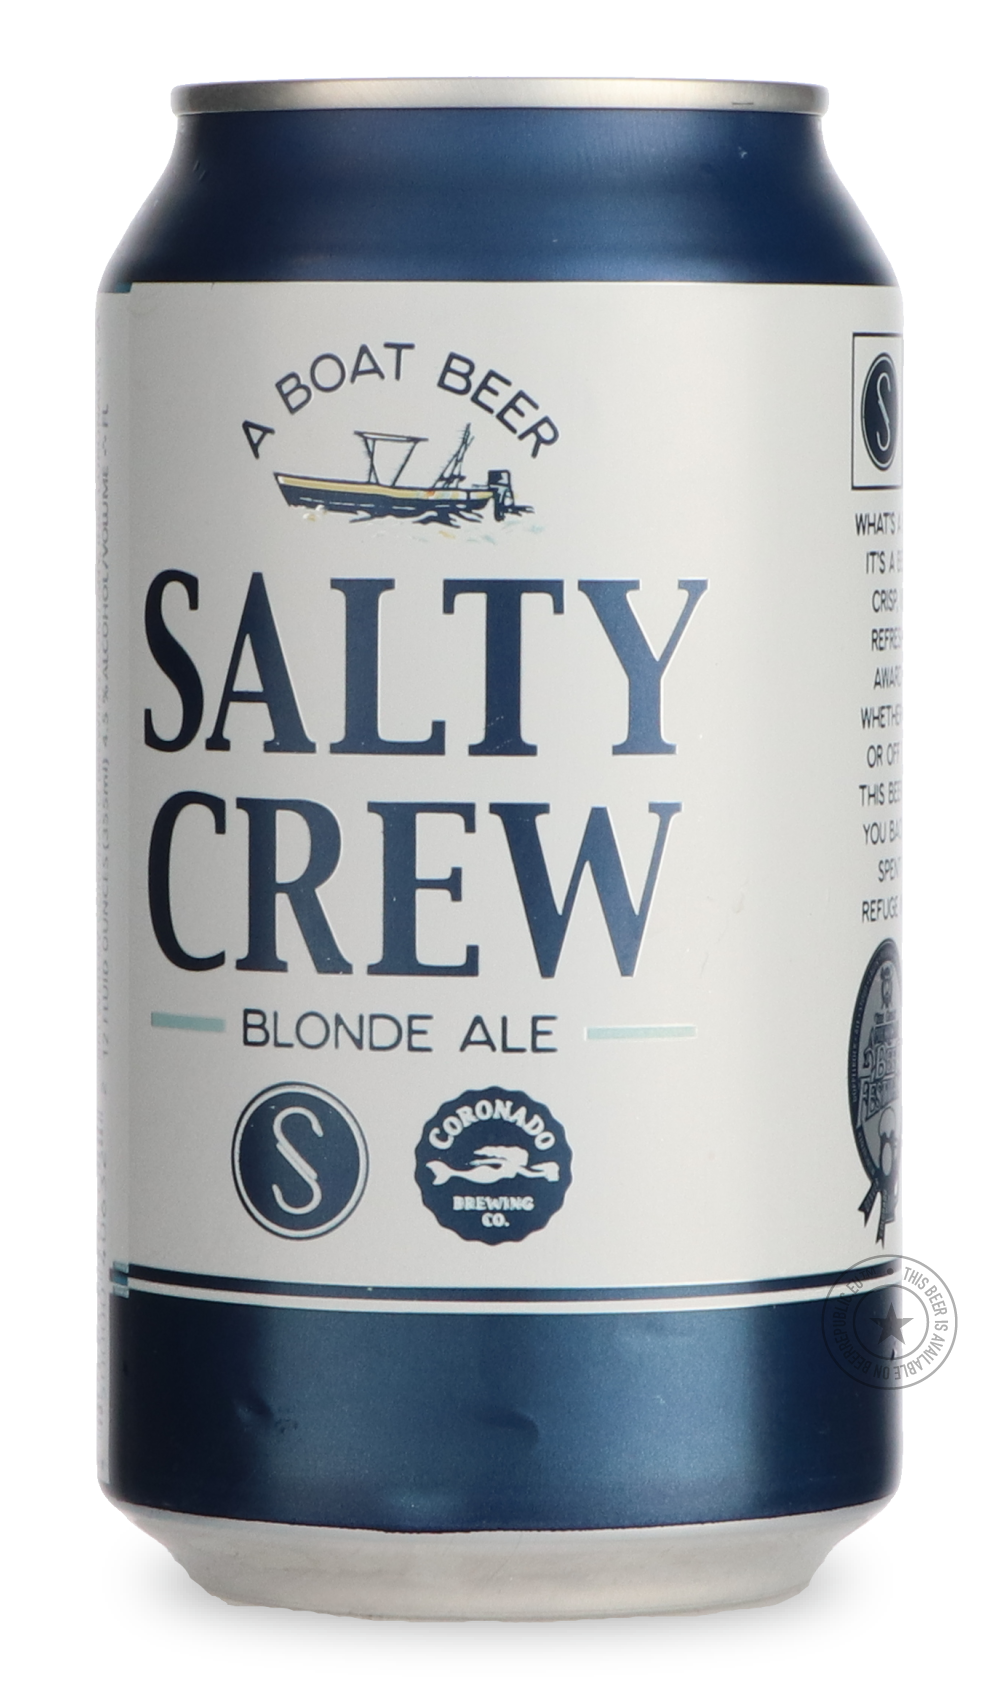 -Coronado- Salty Crew-Pale- Only @ Beer Republic - The best online beer store for American & Canadian craft beer - Buy beer online from the USA and Canada - Bier online kopen - Amerikaans bier kopen - Craft beer store - Craft beer kopen - Amerikanisch bier kaufen - Bier online kaufen - Acheter biere online - IPA - Stout - Porter - New England IPA - Hazy IPA - Imperial Stout - Barrel Aged - Barrel Aged Imperial Stout - Brown - Dark beer - Blond - Blonde - Pilsner - Lager - Wheat - Weizen - Amber - Barley Win